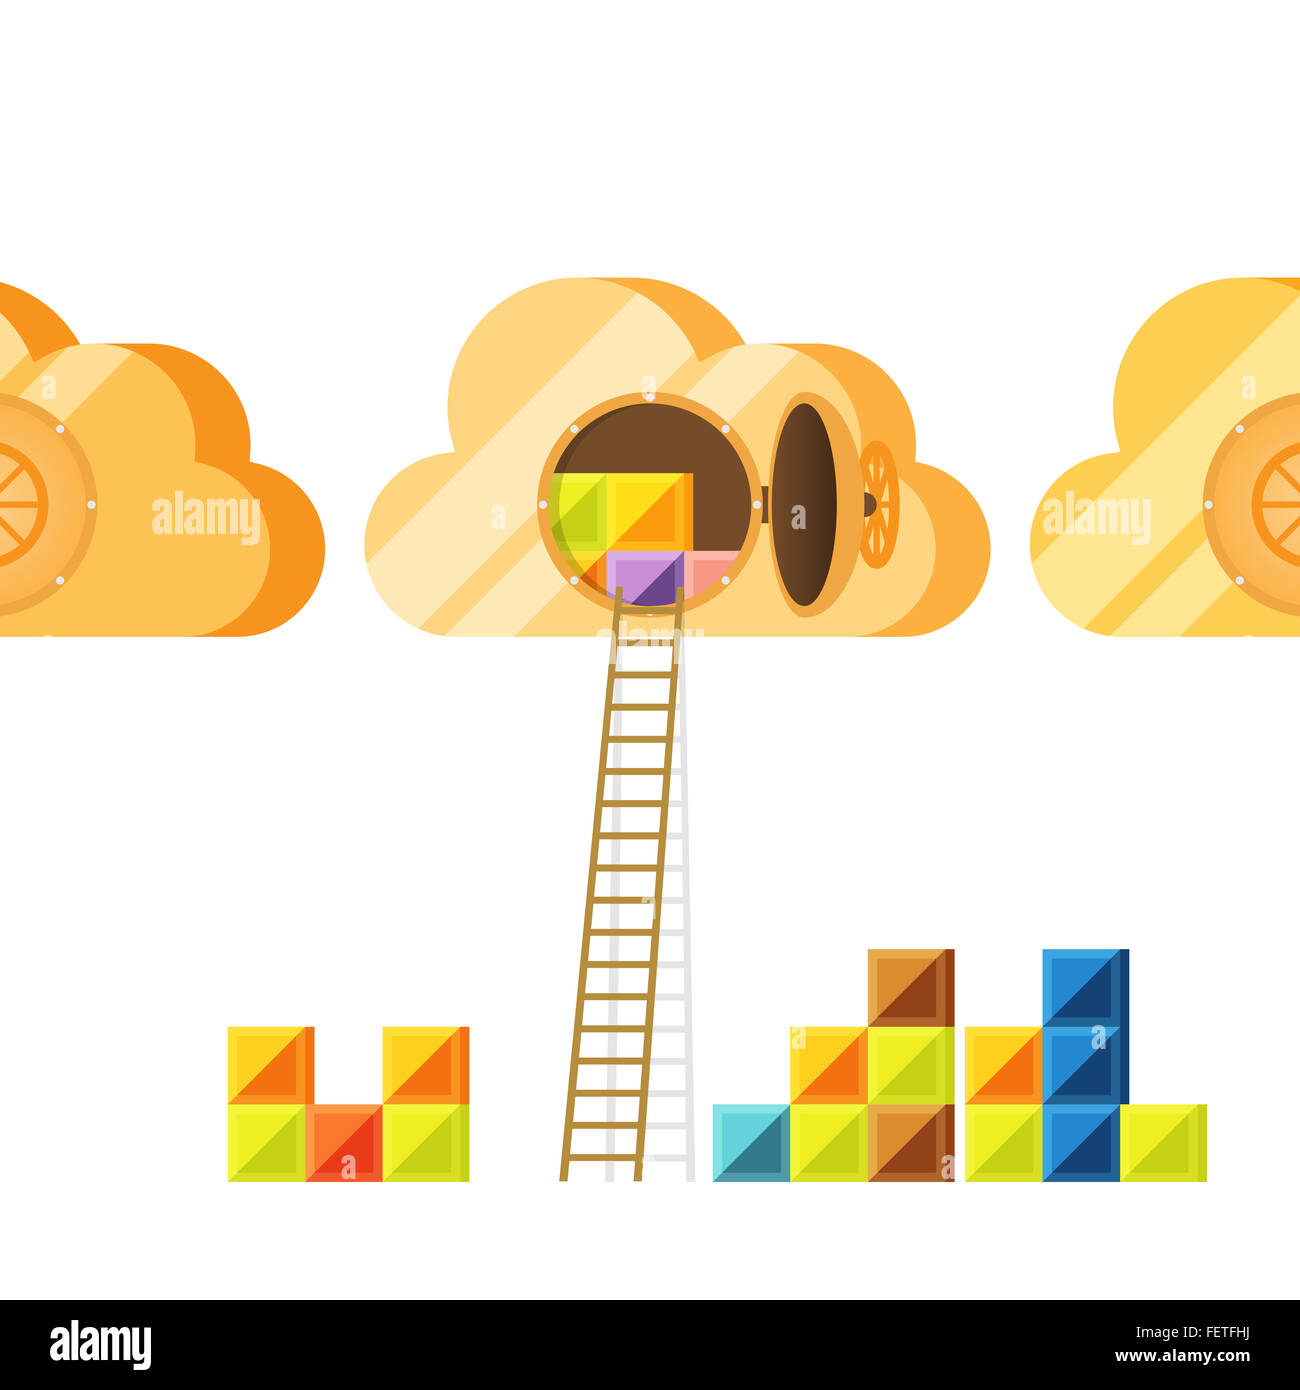 Vector illustration of data vault access on a cloud storage network concept. Stock Photo